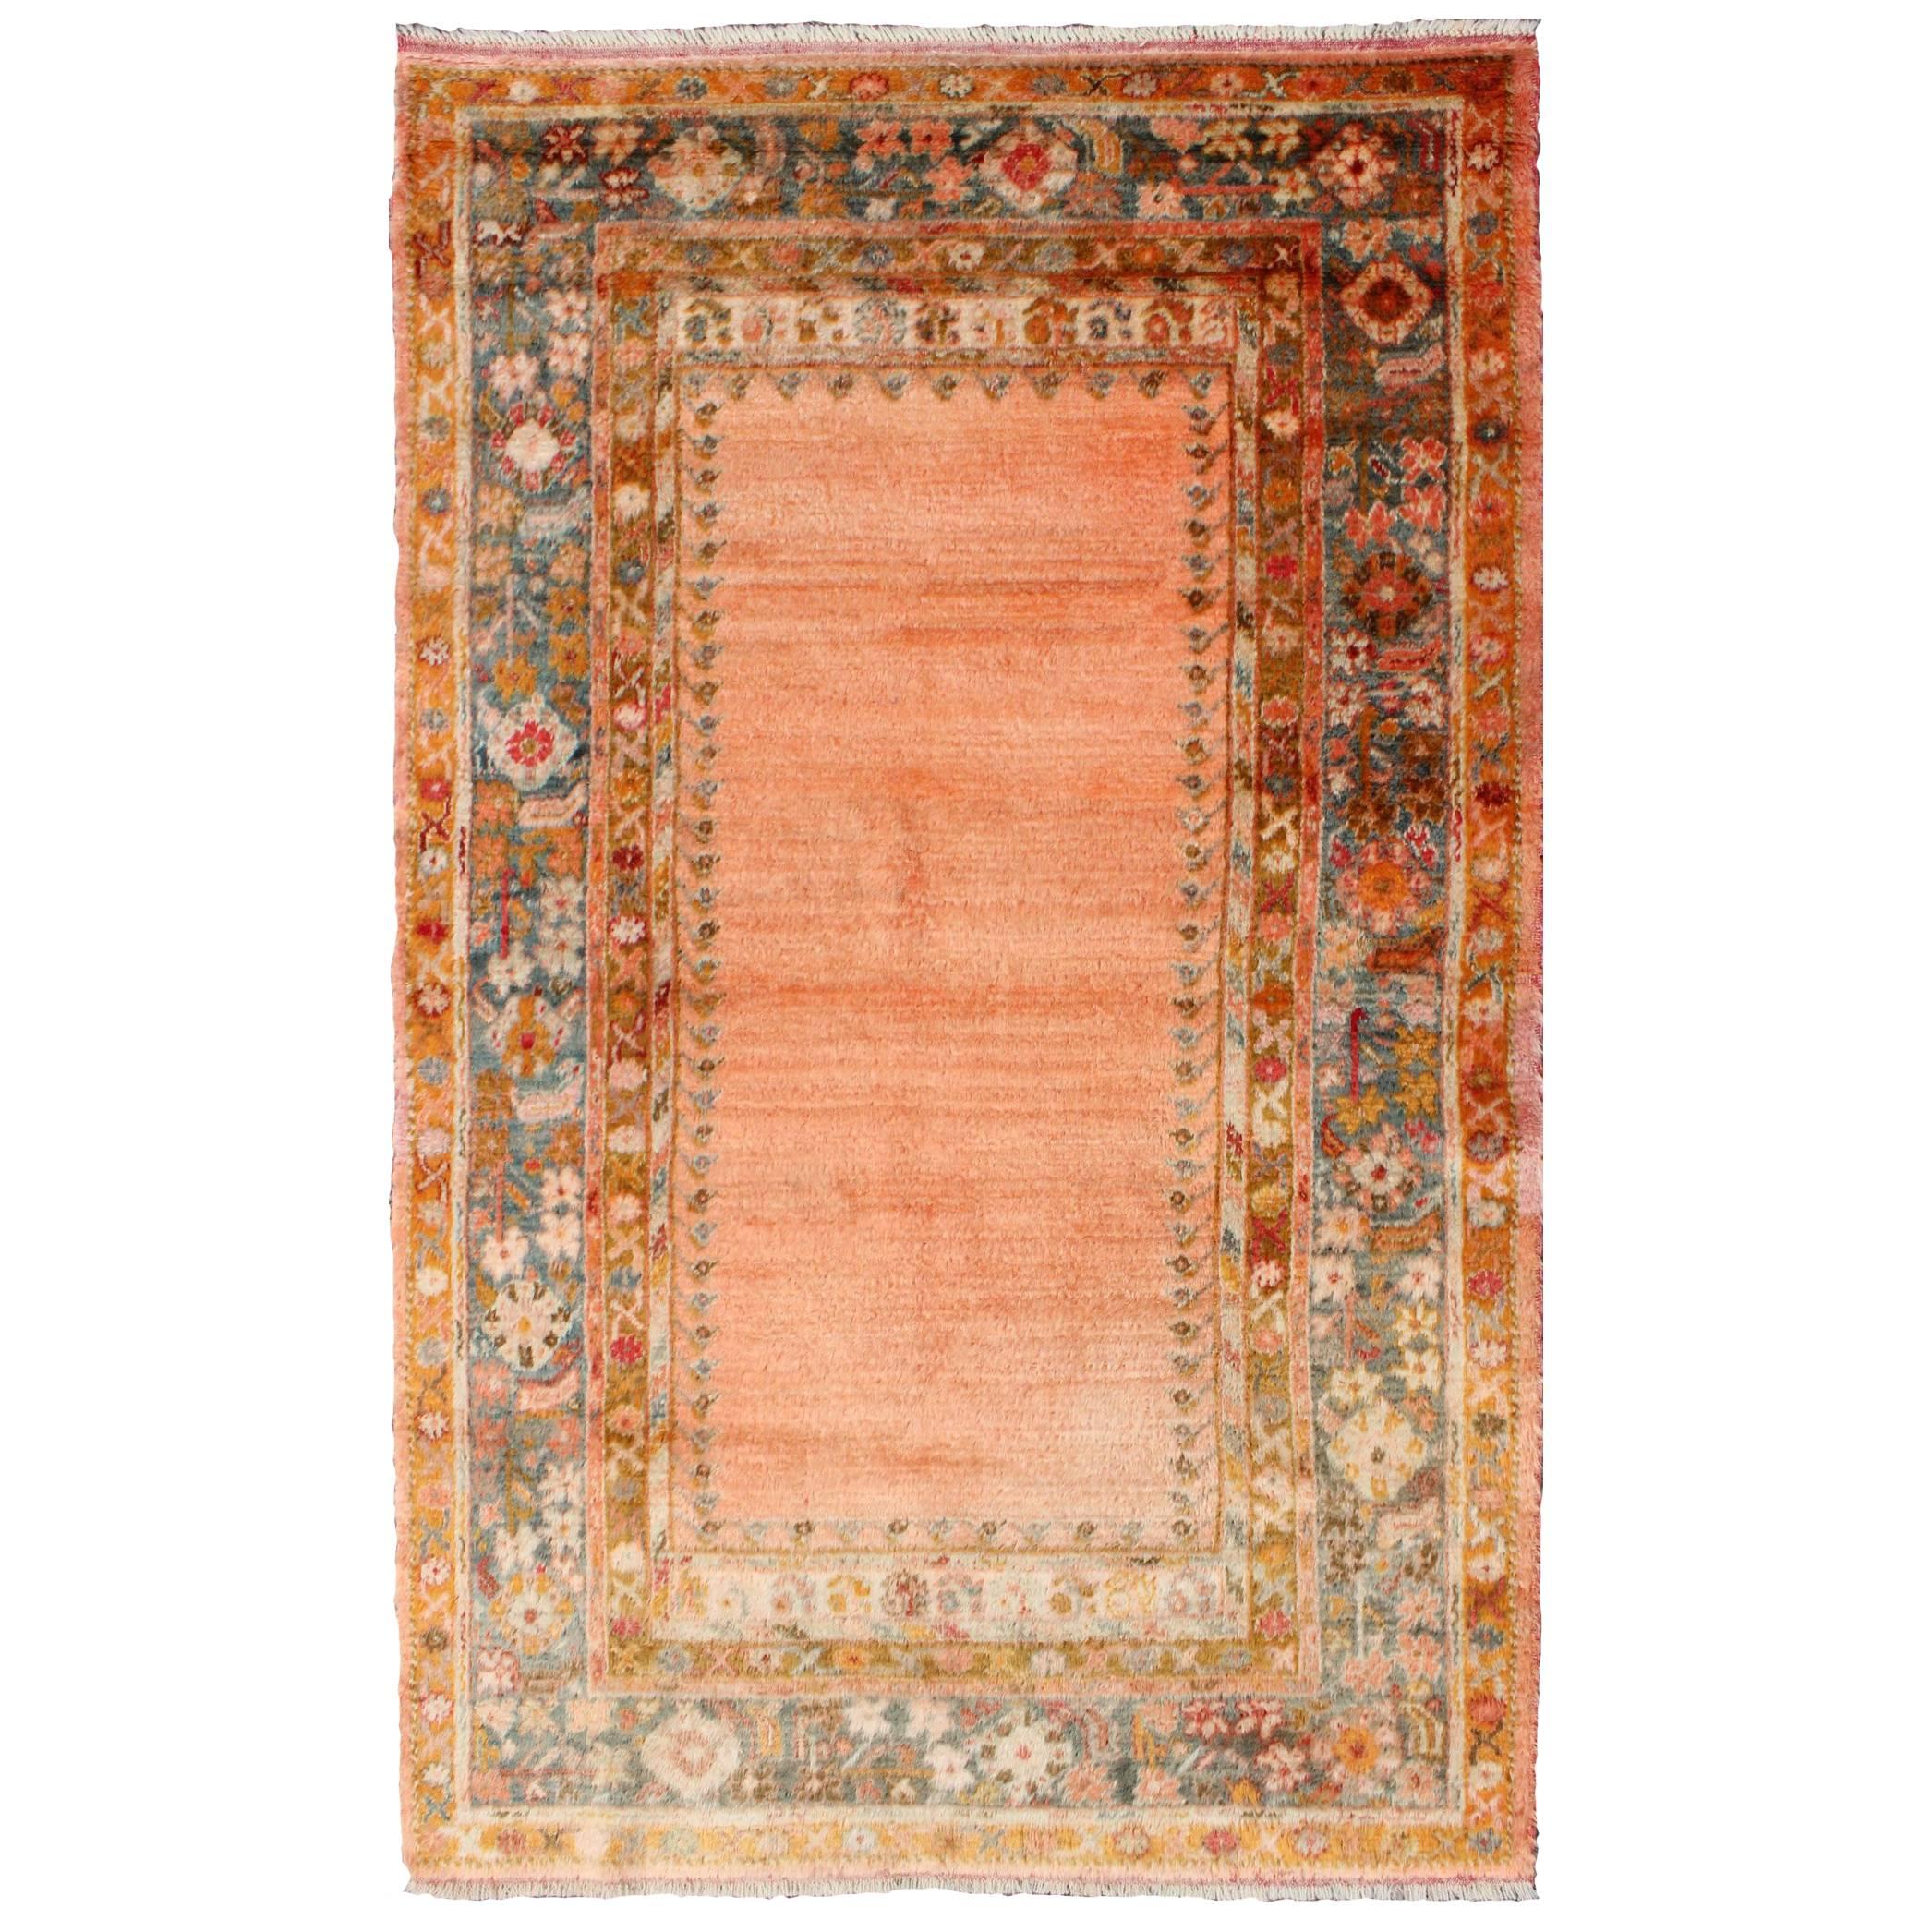 Antique Angora Wool Oushak Rug with Solid Salmon Field and Floral Borders For Sale